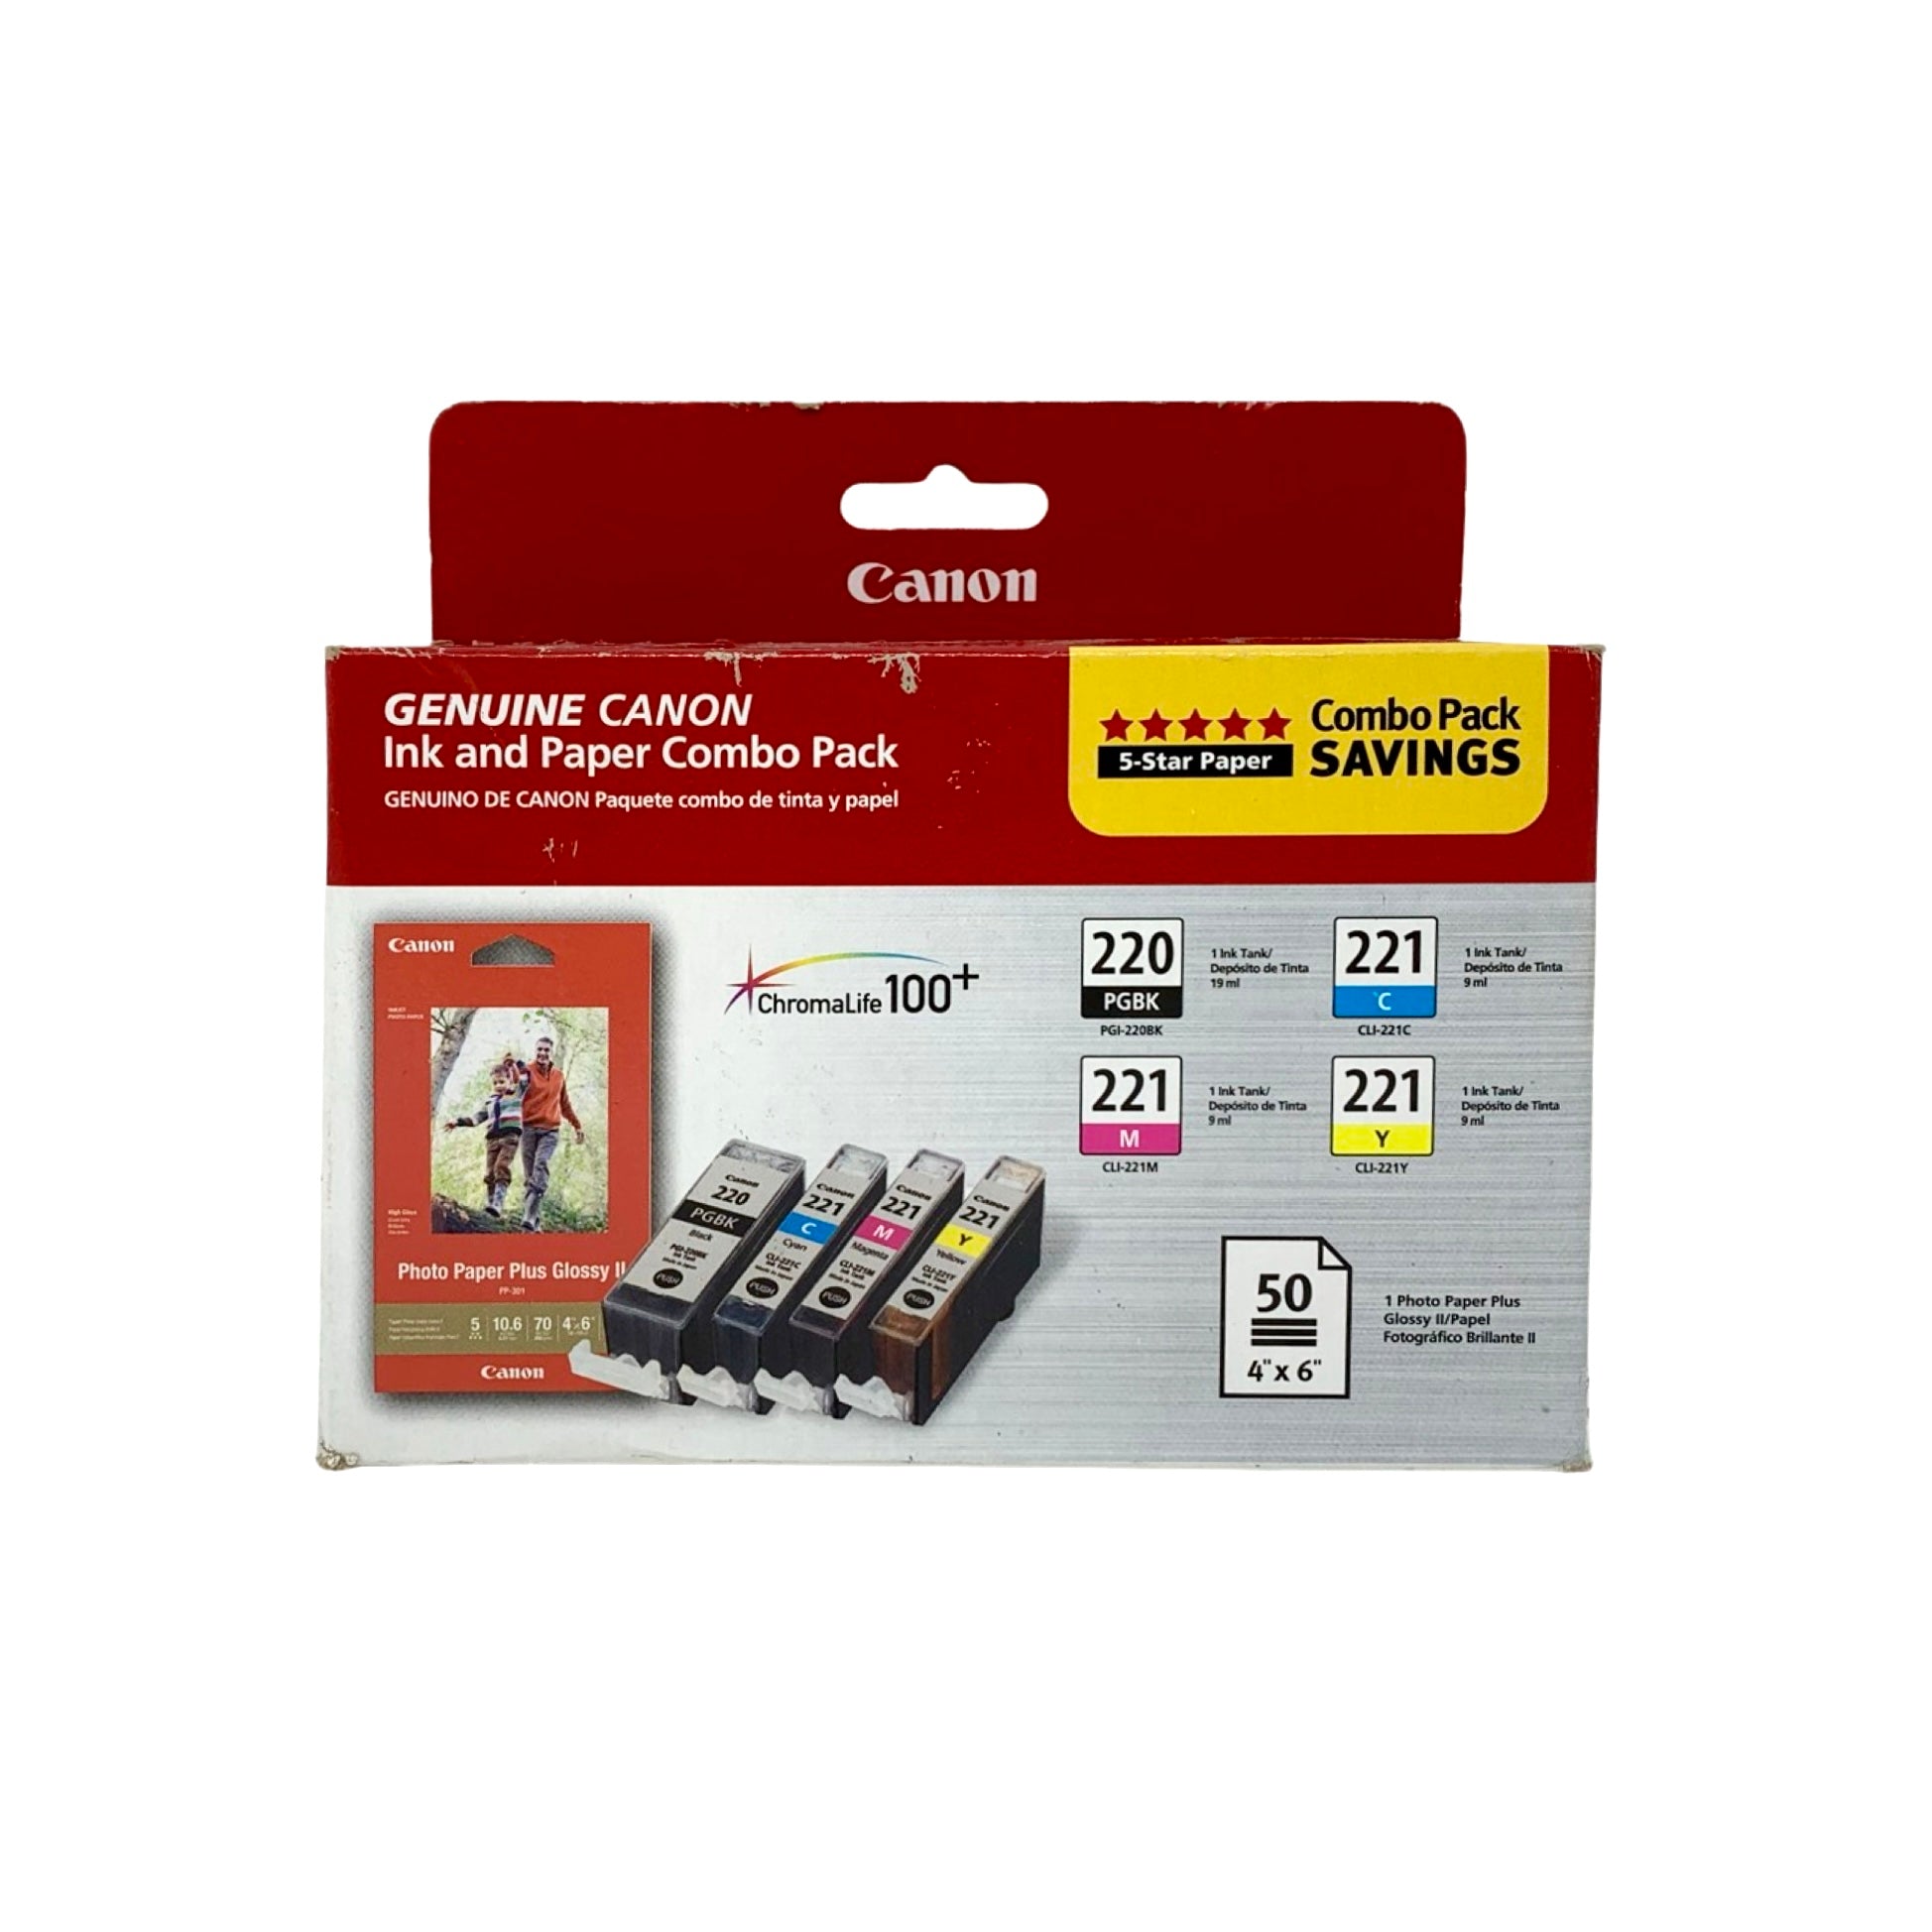 Genuine Canon PGI 220/CLI-221 Combo with Paper Plus II Black/Color Ink Cartridges, 4/Pack (2945B011)